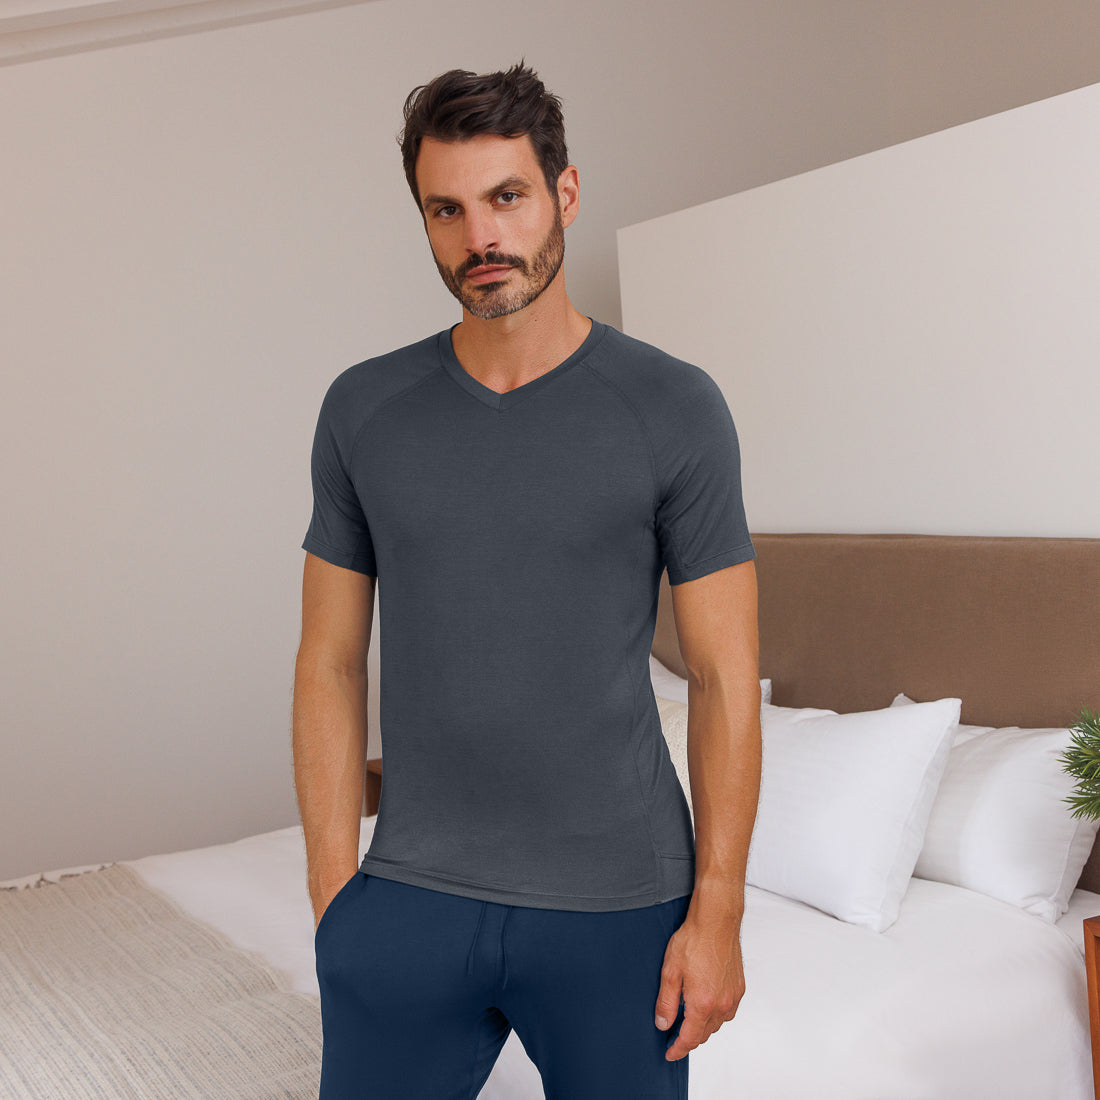 The best pajamas for men  DAGSMEJAN – tagged tops